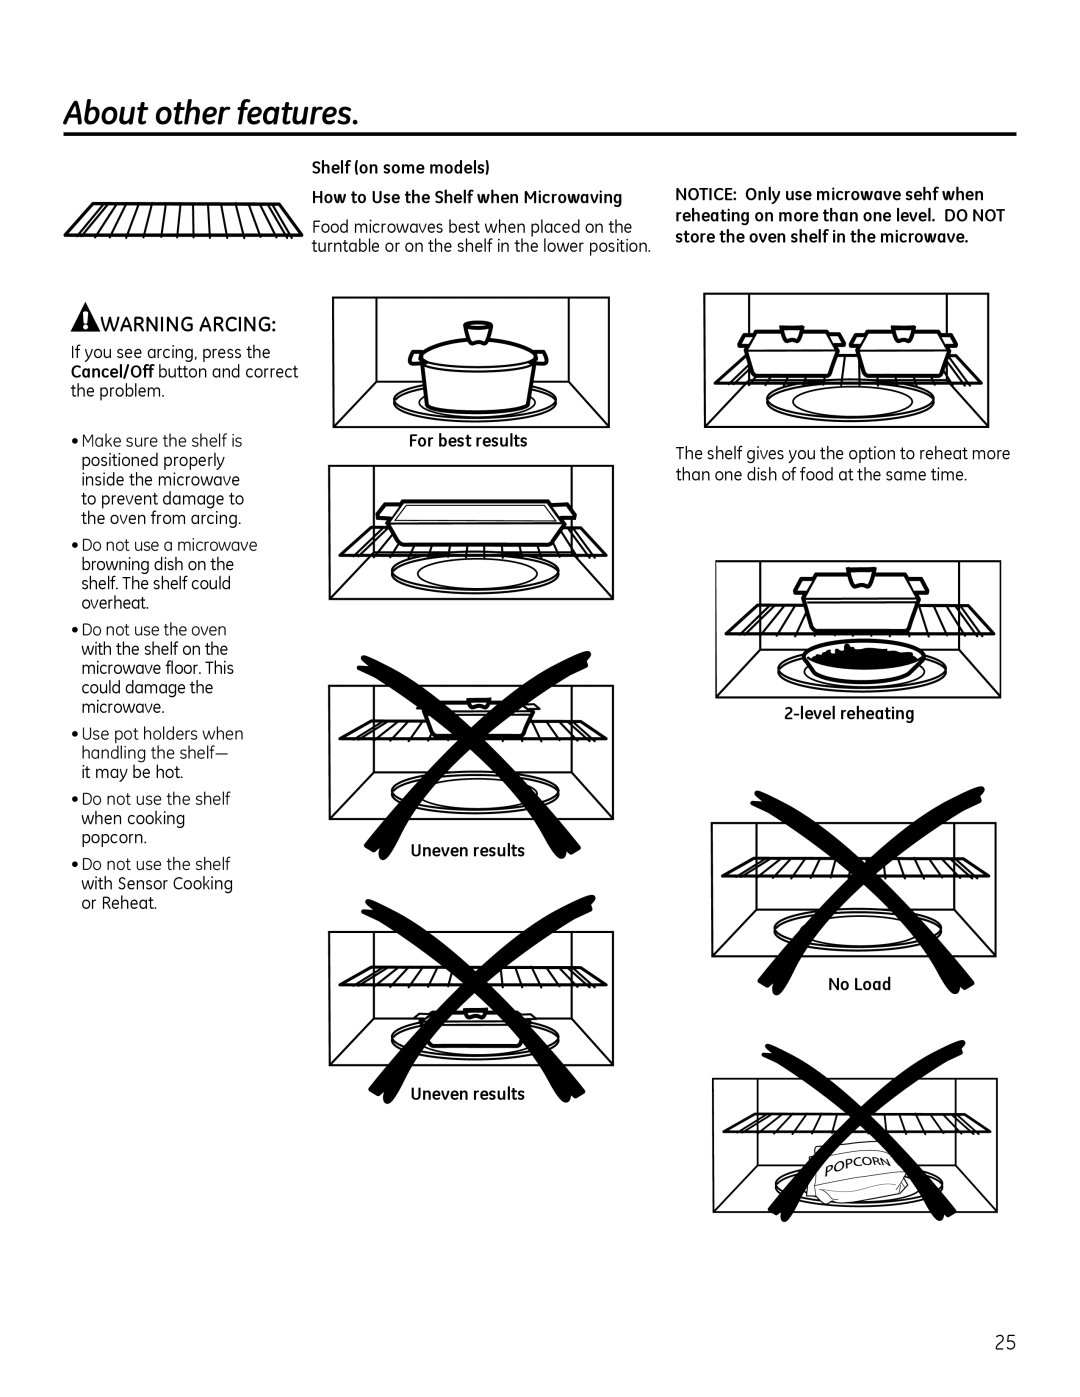 GE Microwave Oven Warning Arcing, About other features, Shelf on some models, How to Use the Shelf when Microwaving 